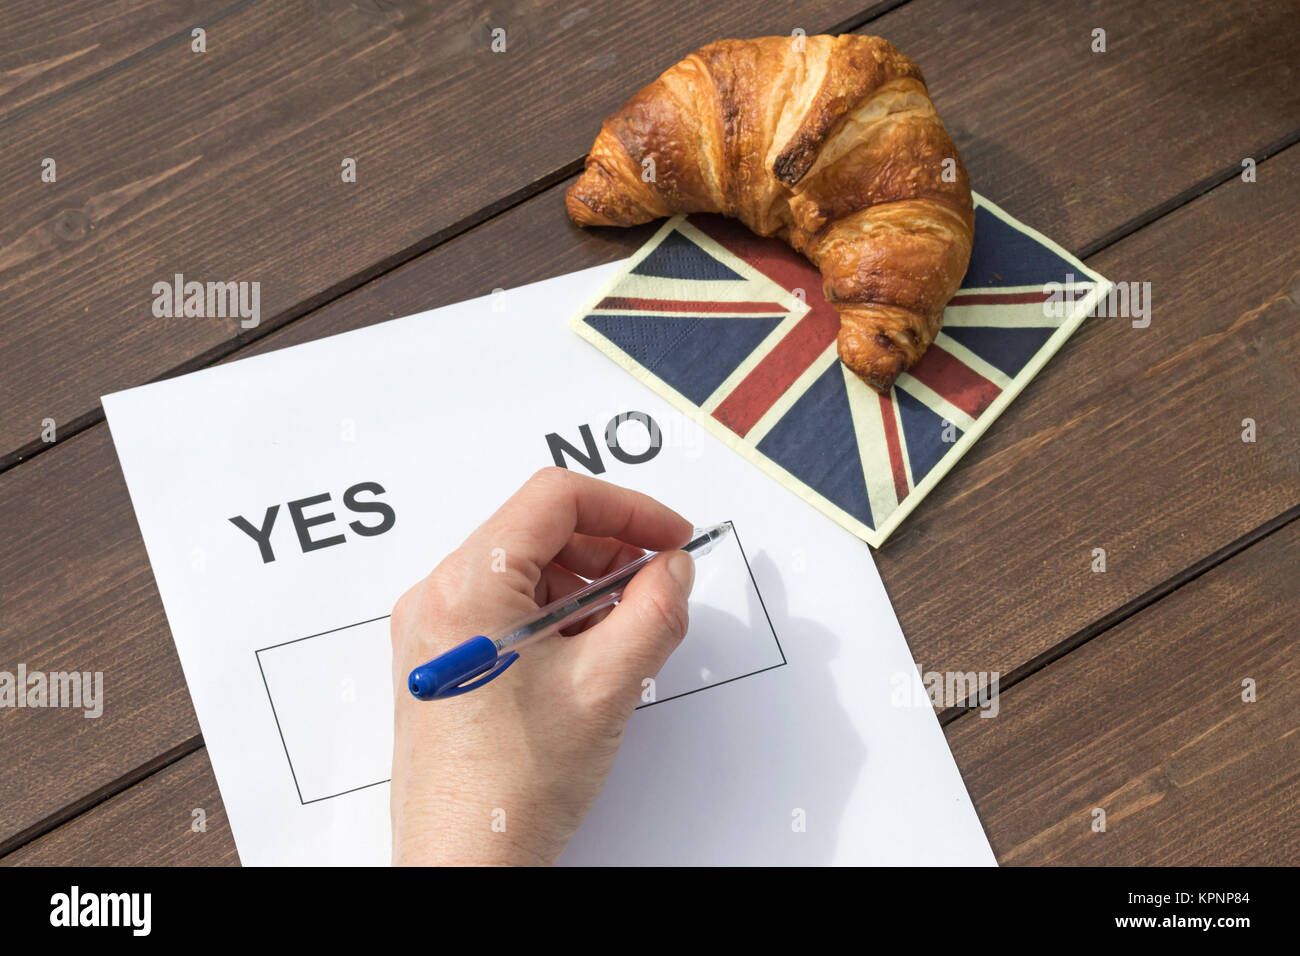 Selecting NO in the referendum Stock Photo